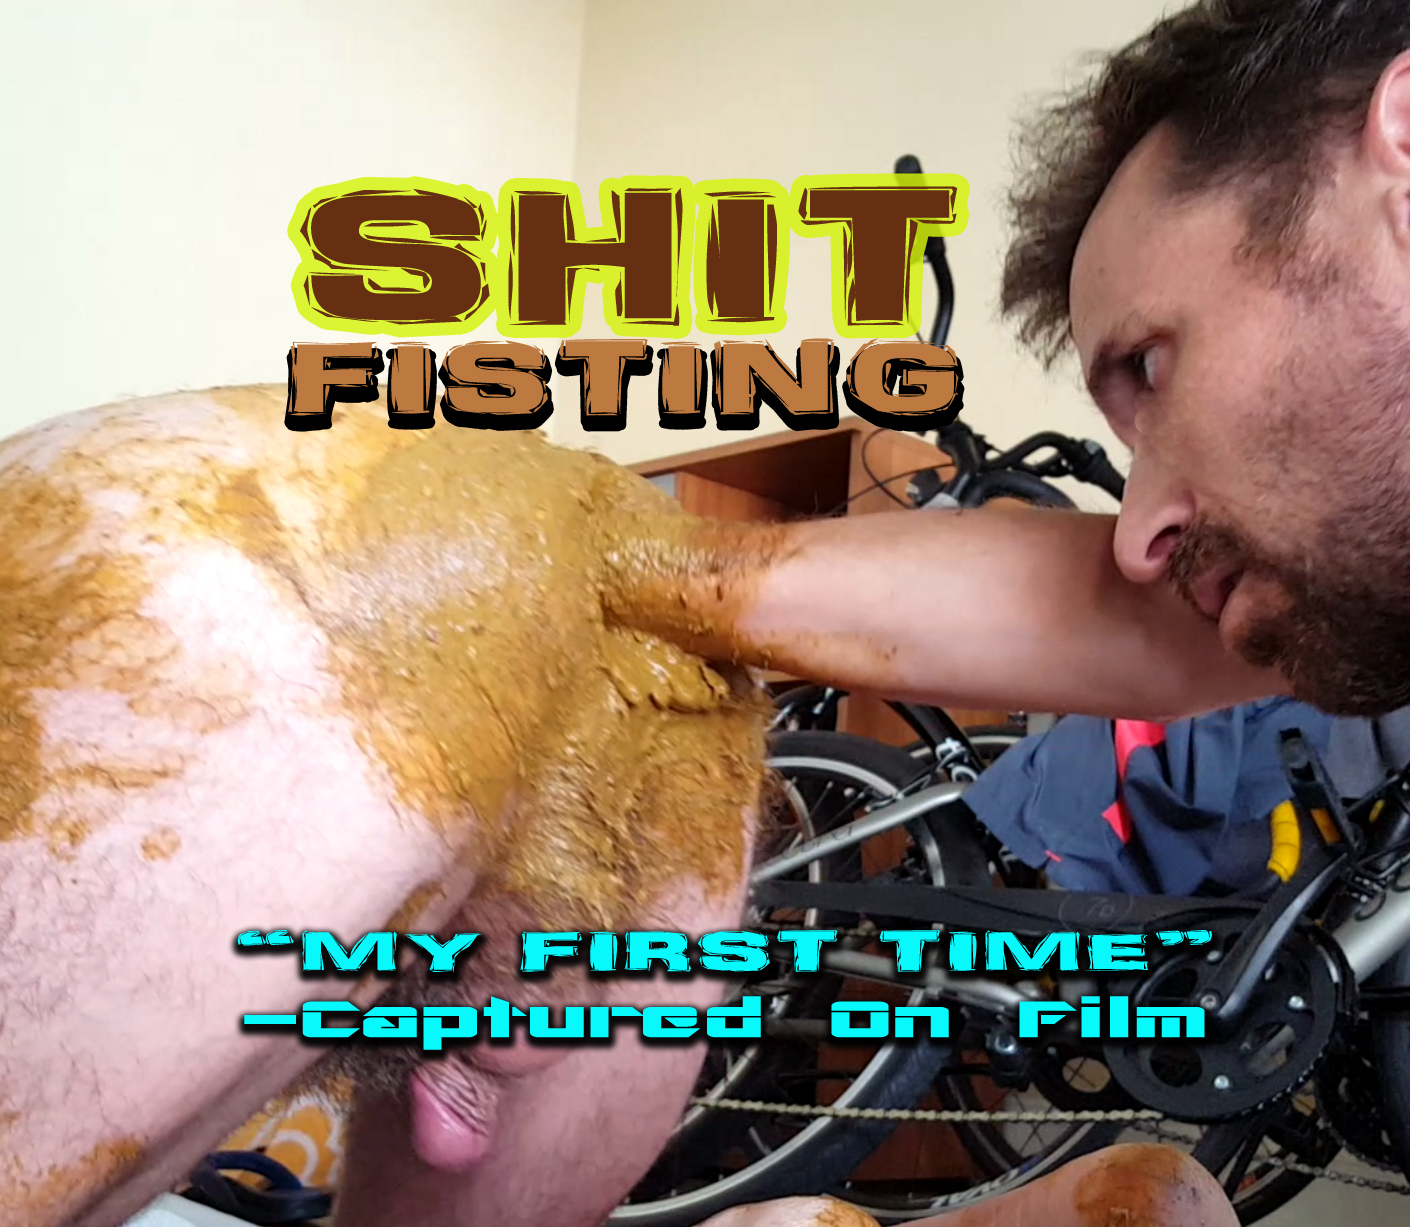 SHIT-FISTING a Hot, Hairy Ass - A MY FIRST TIME Experience